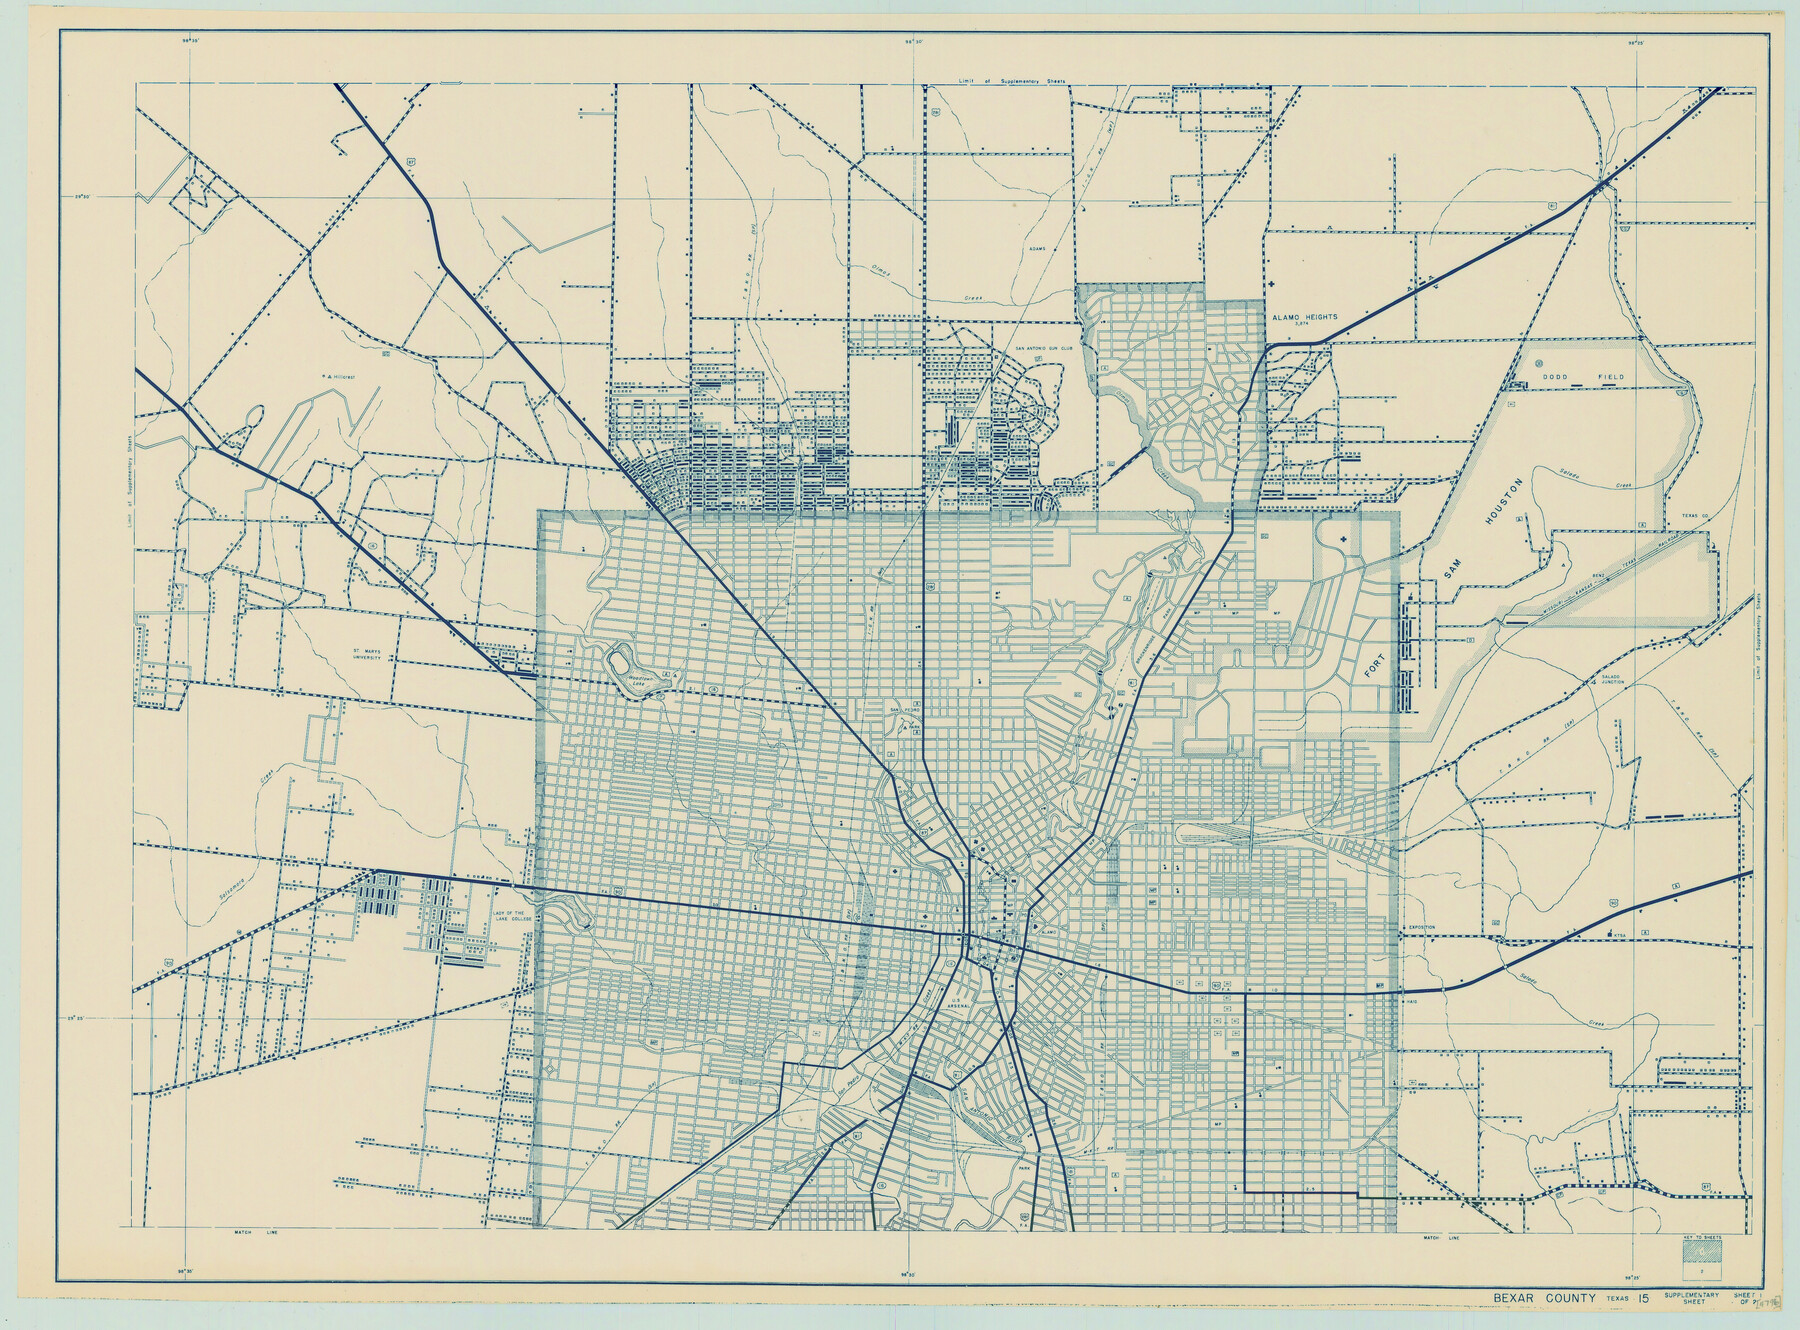 79018, General Highway Map.  Detail of Cities and Towns in Bexar County, Texas [San Antonio and vicinity], Texas State Library and Archives